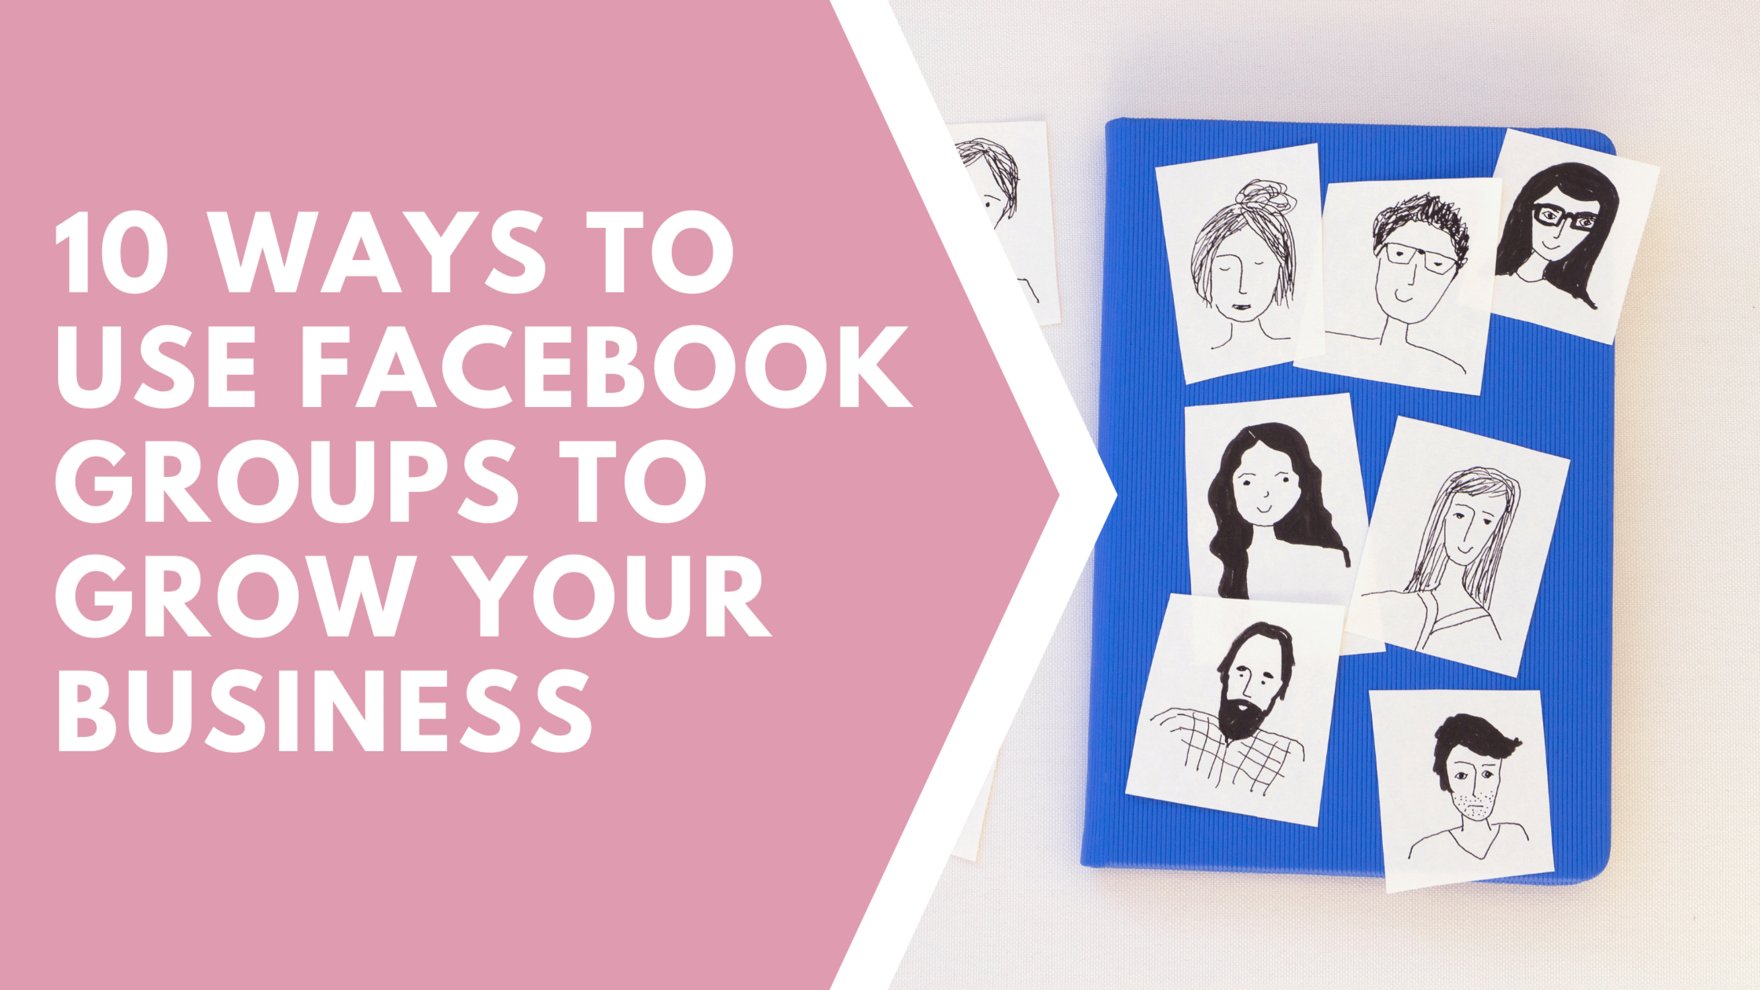 10 WAYS TO USE FACEBOOK GROUPS TO GROW YOUR BUSINESS (1)